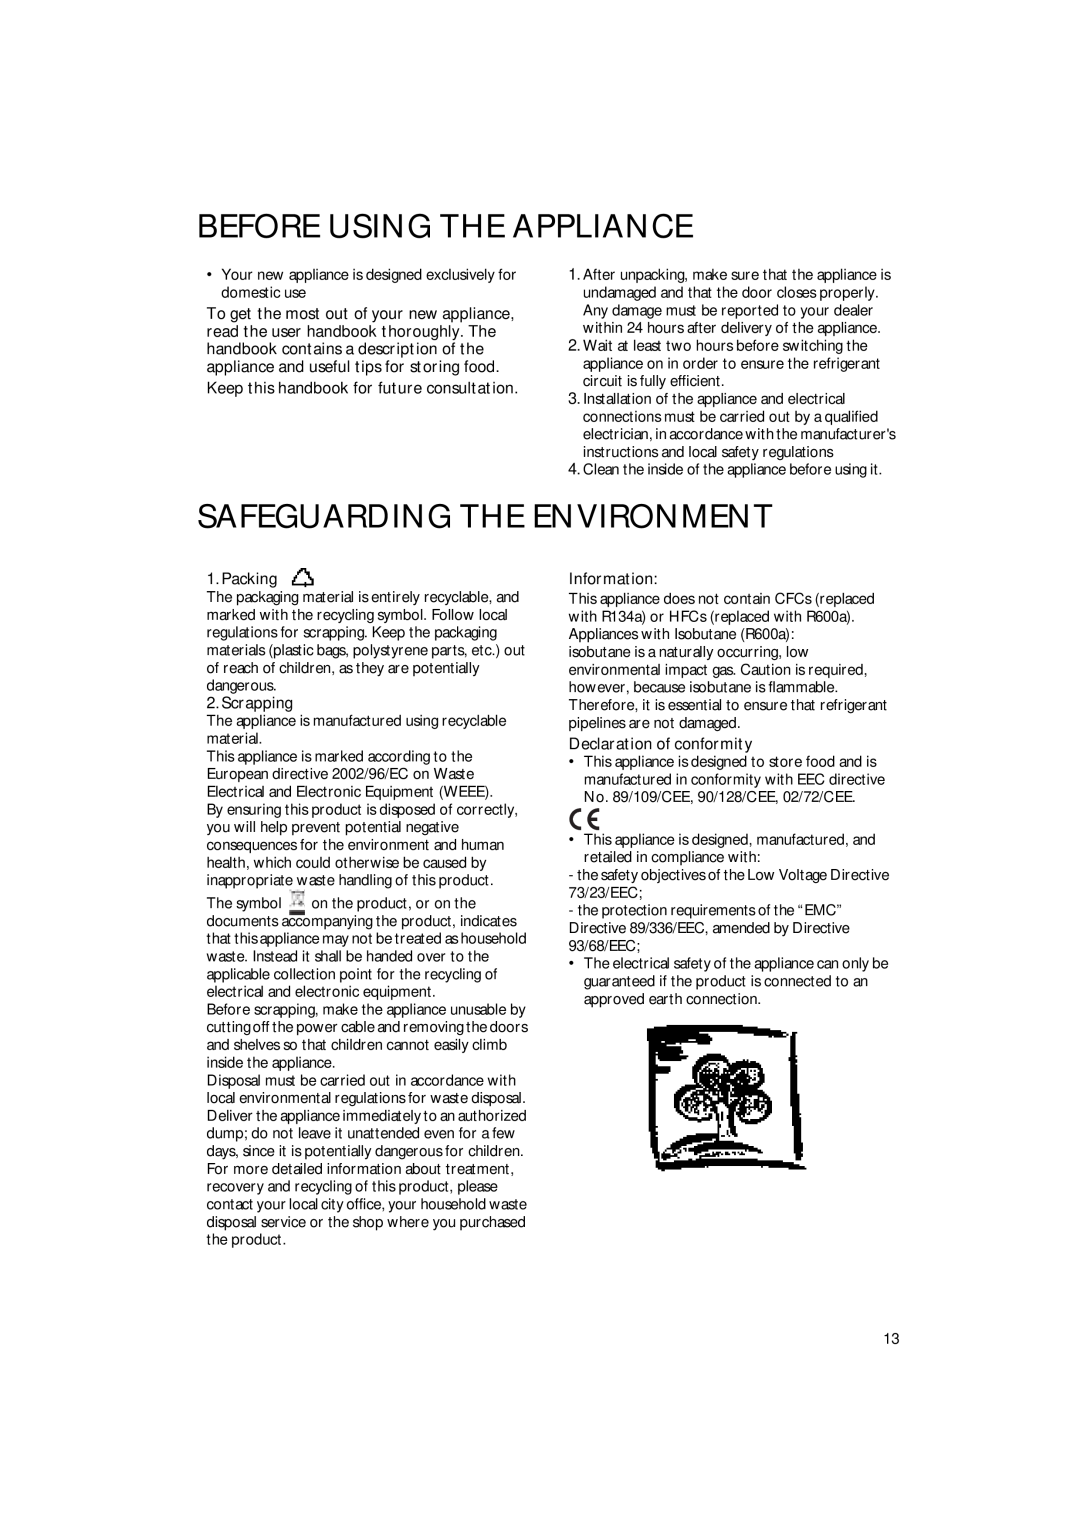 Smeg FR238APL manual Before Using The Appliance, Safeguarding The Environment, Keep this handbook for future consultation 